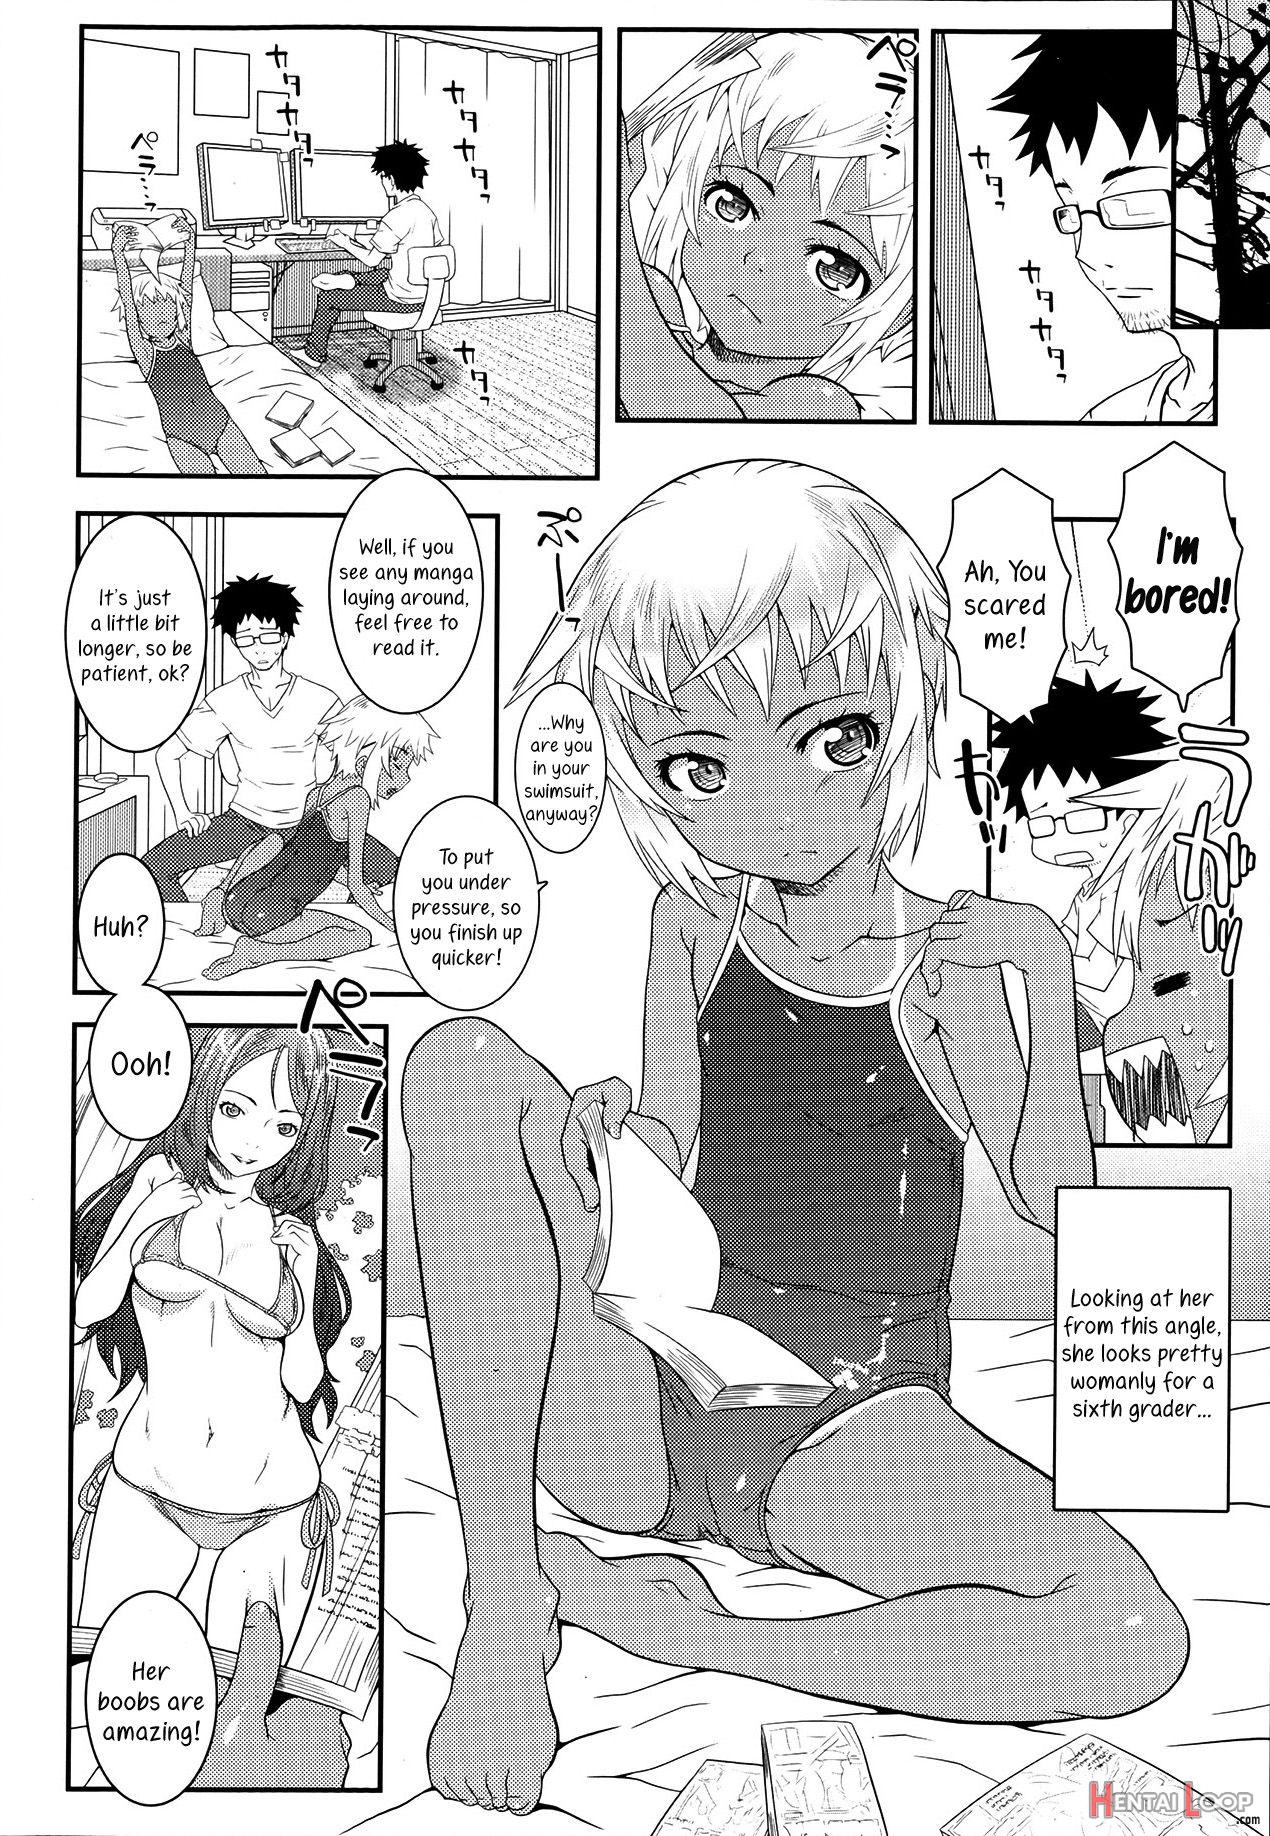 Shoka - Early In Summer page 2